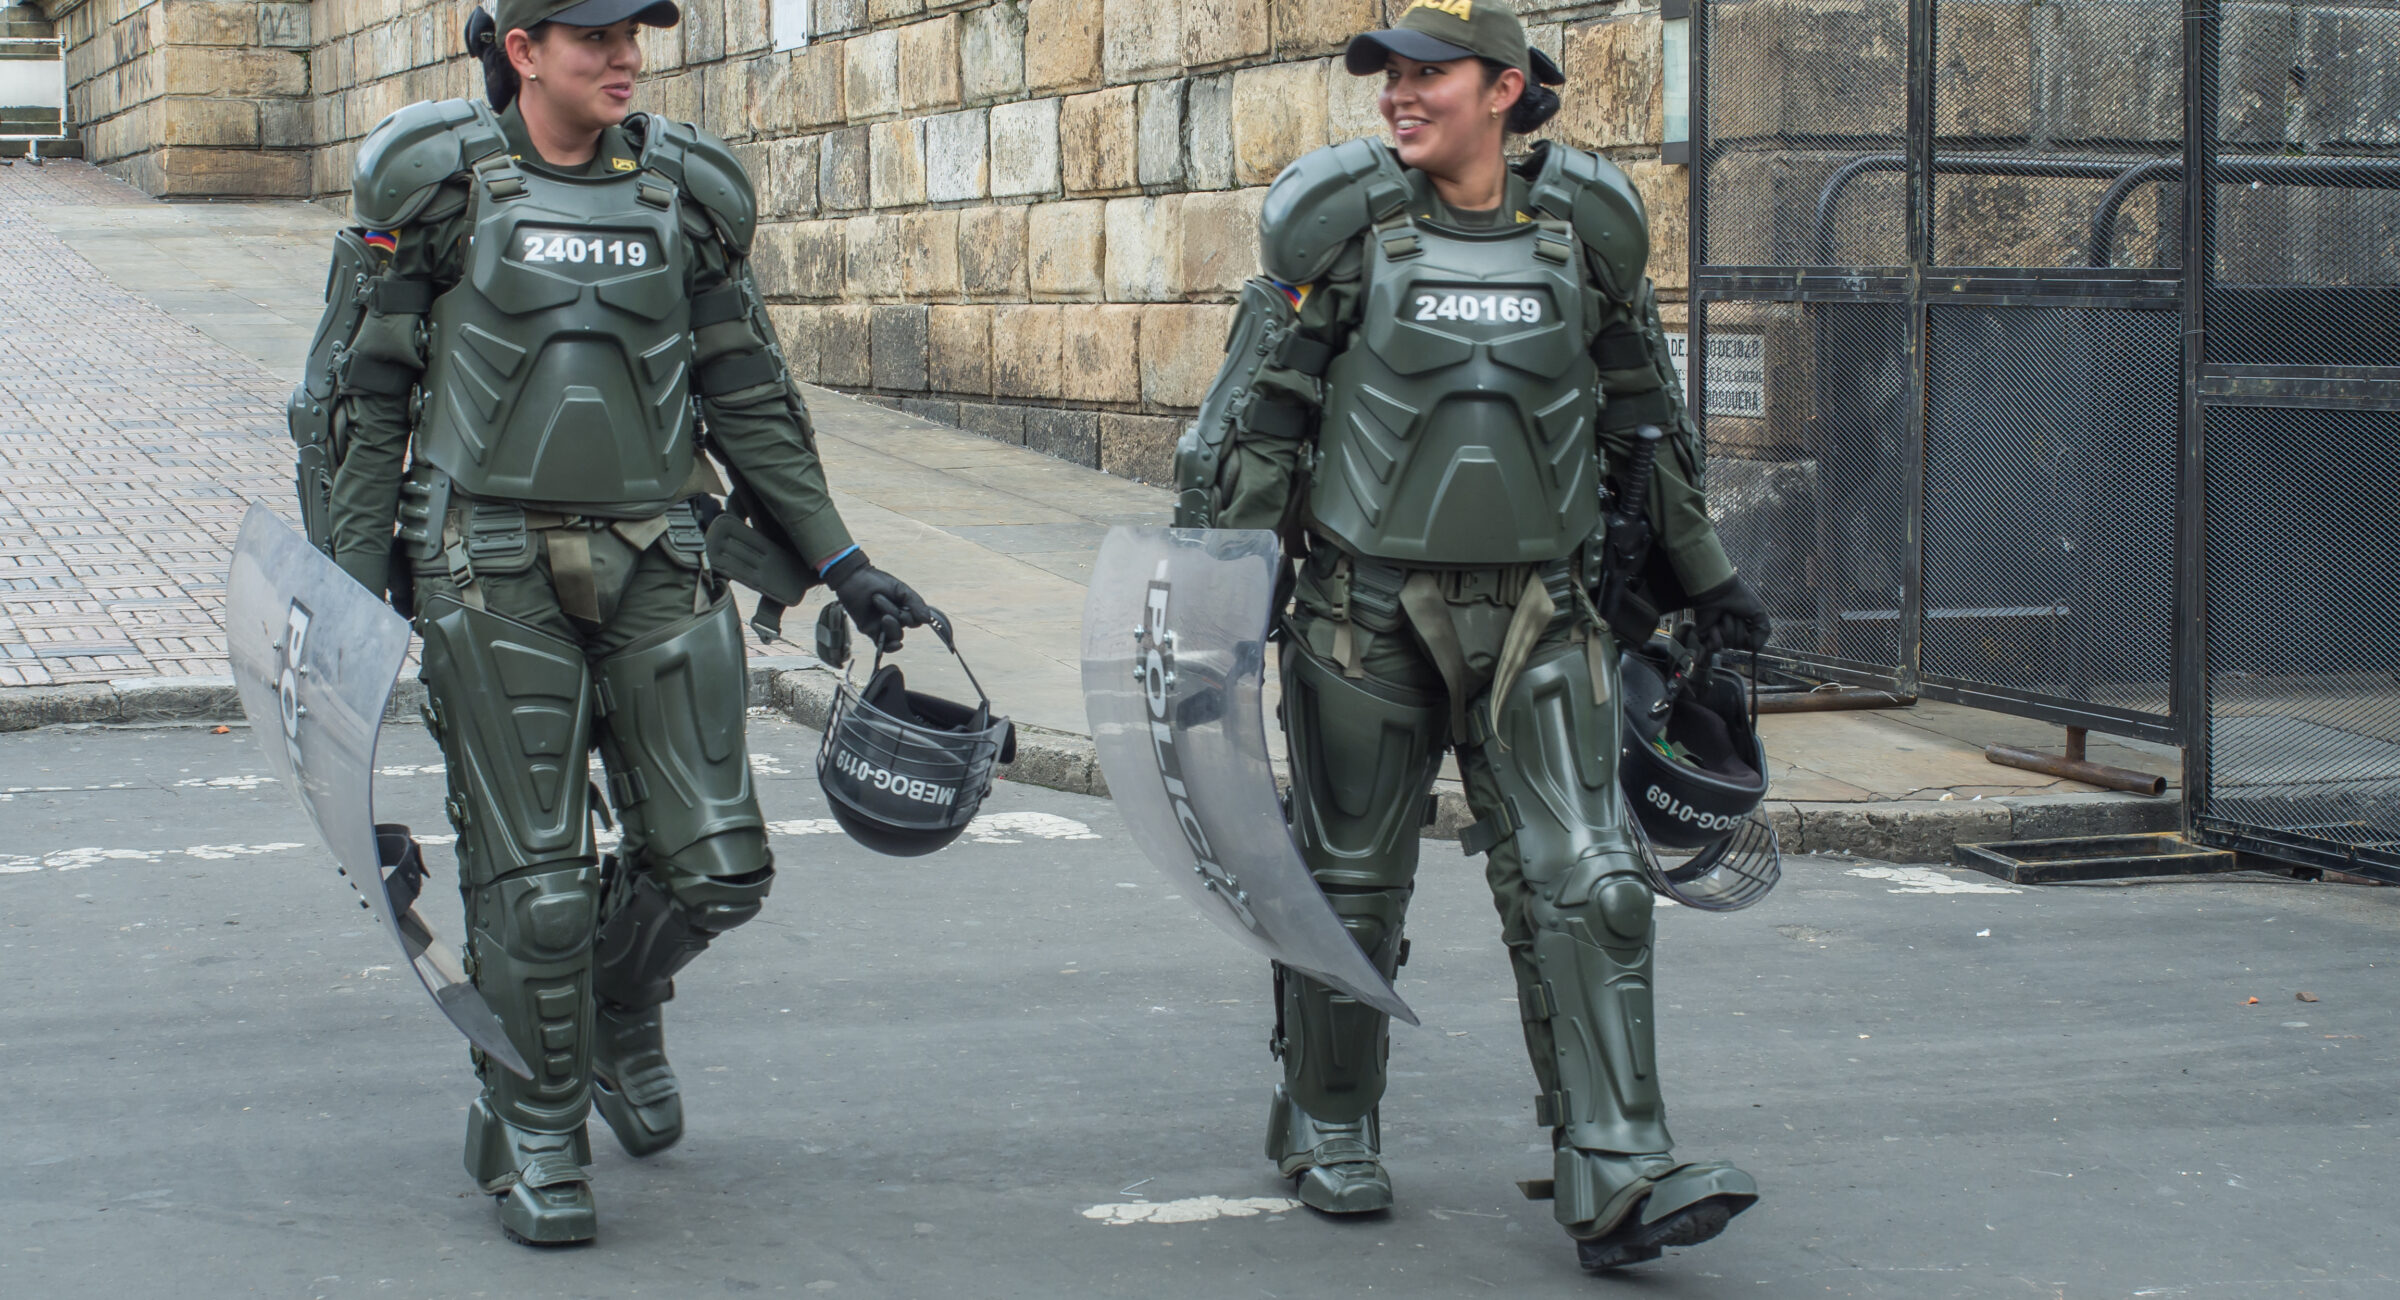 Bogota, Colombia - May 01, 2016: Armed riot police on the streets of Bogota